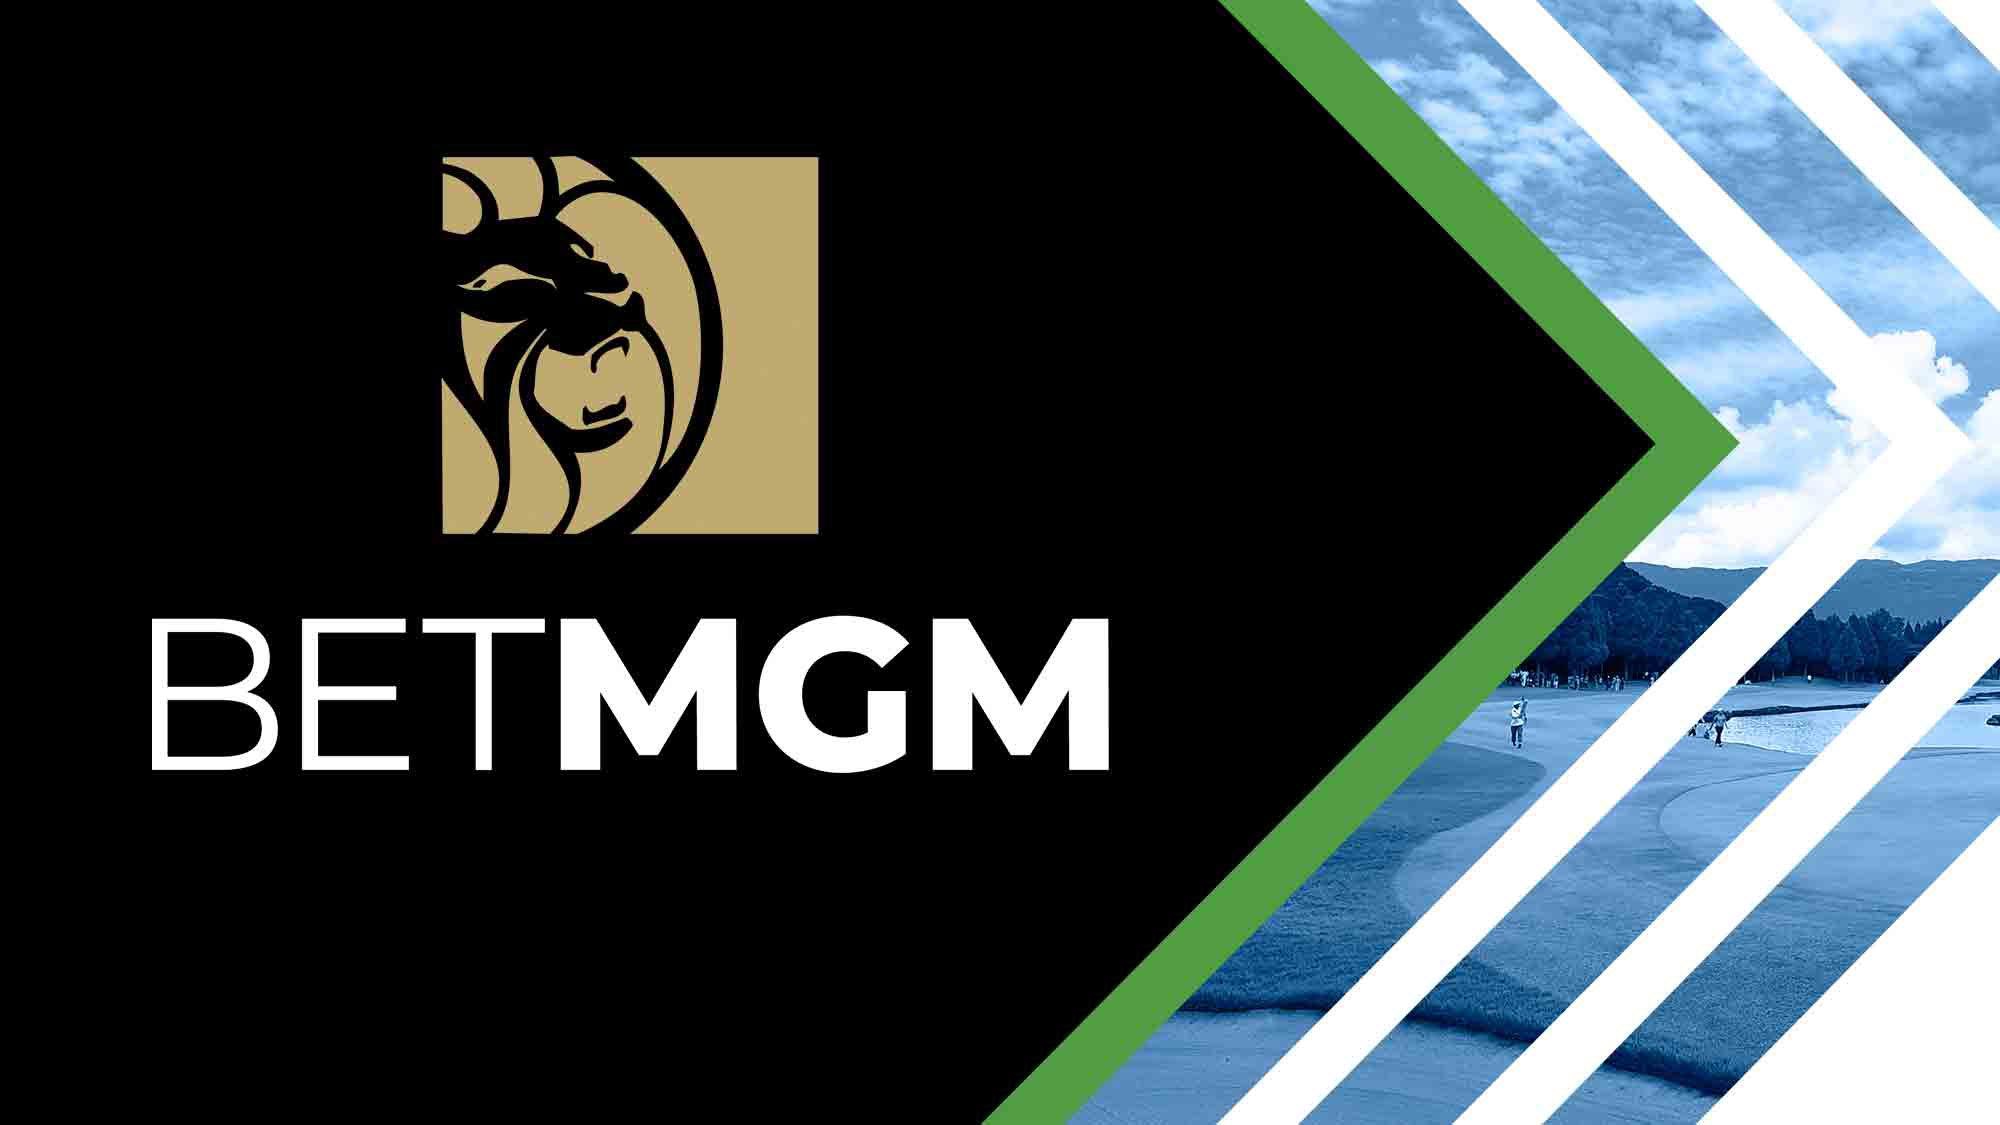 LPGA partners with BetMGM, joins growing sports betting marketplace